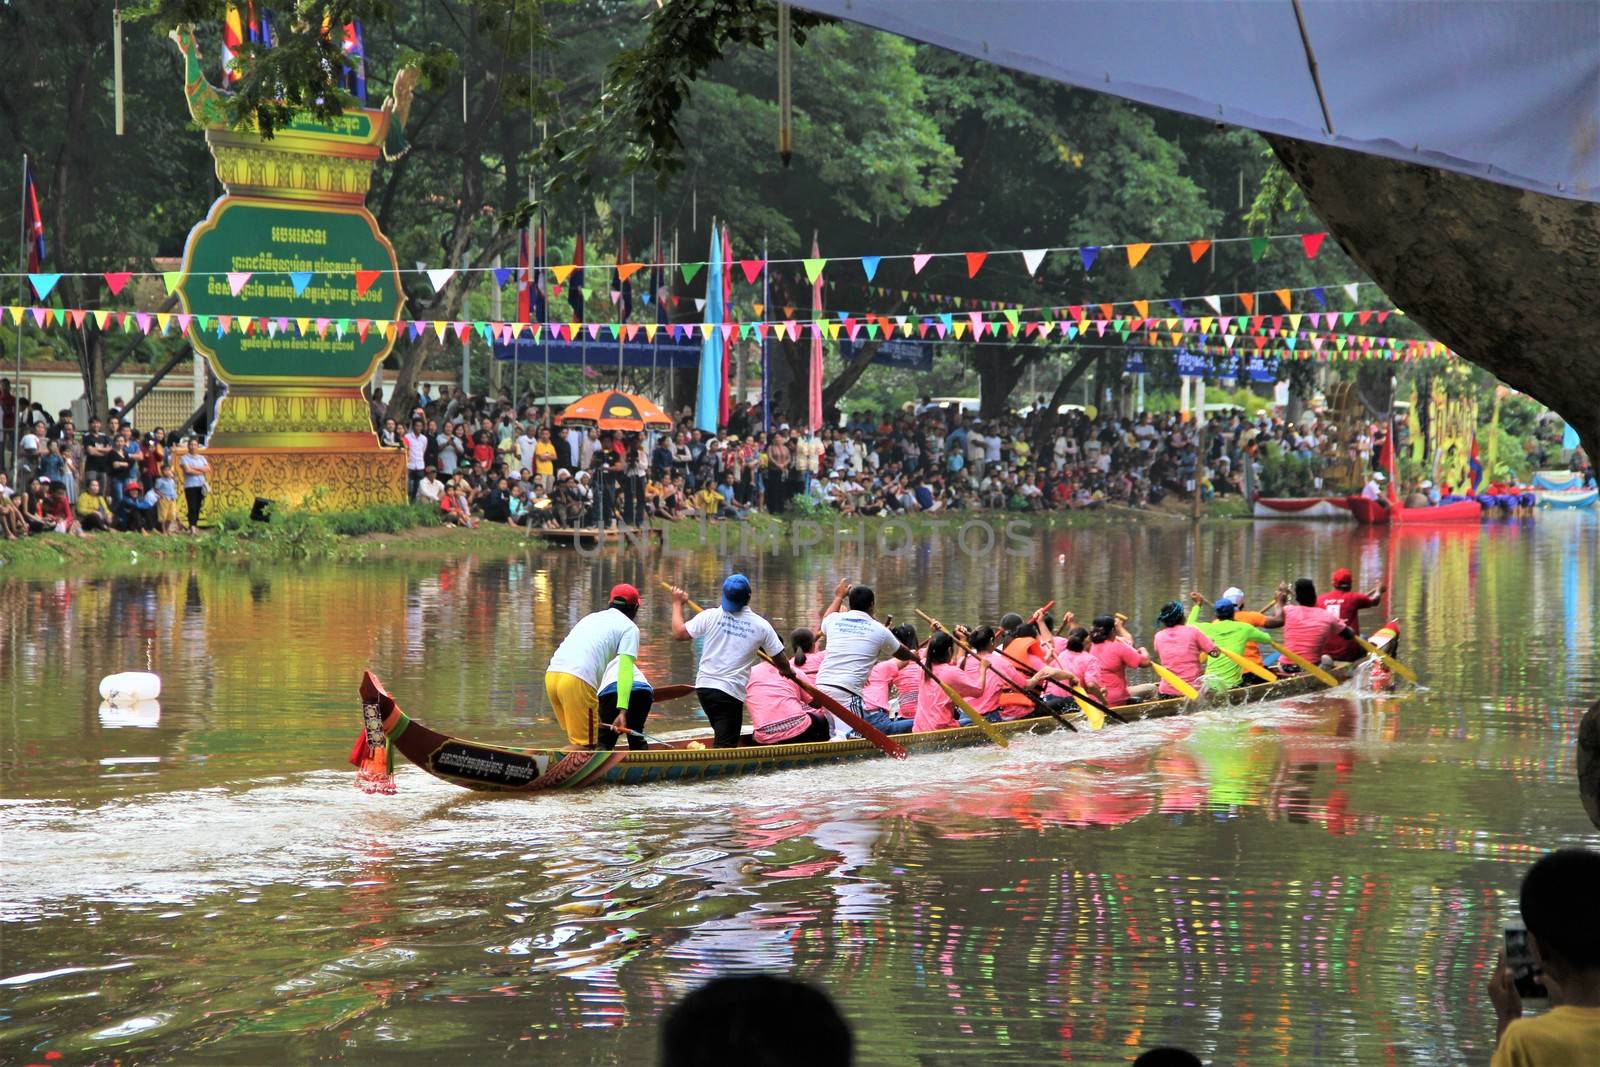 Siem reap boat race during cambodian asia water festival